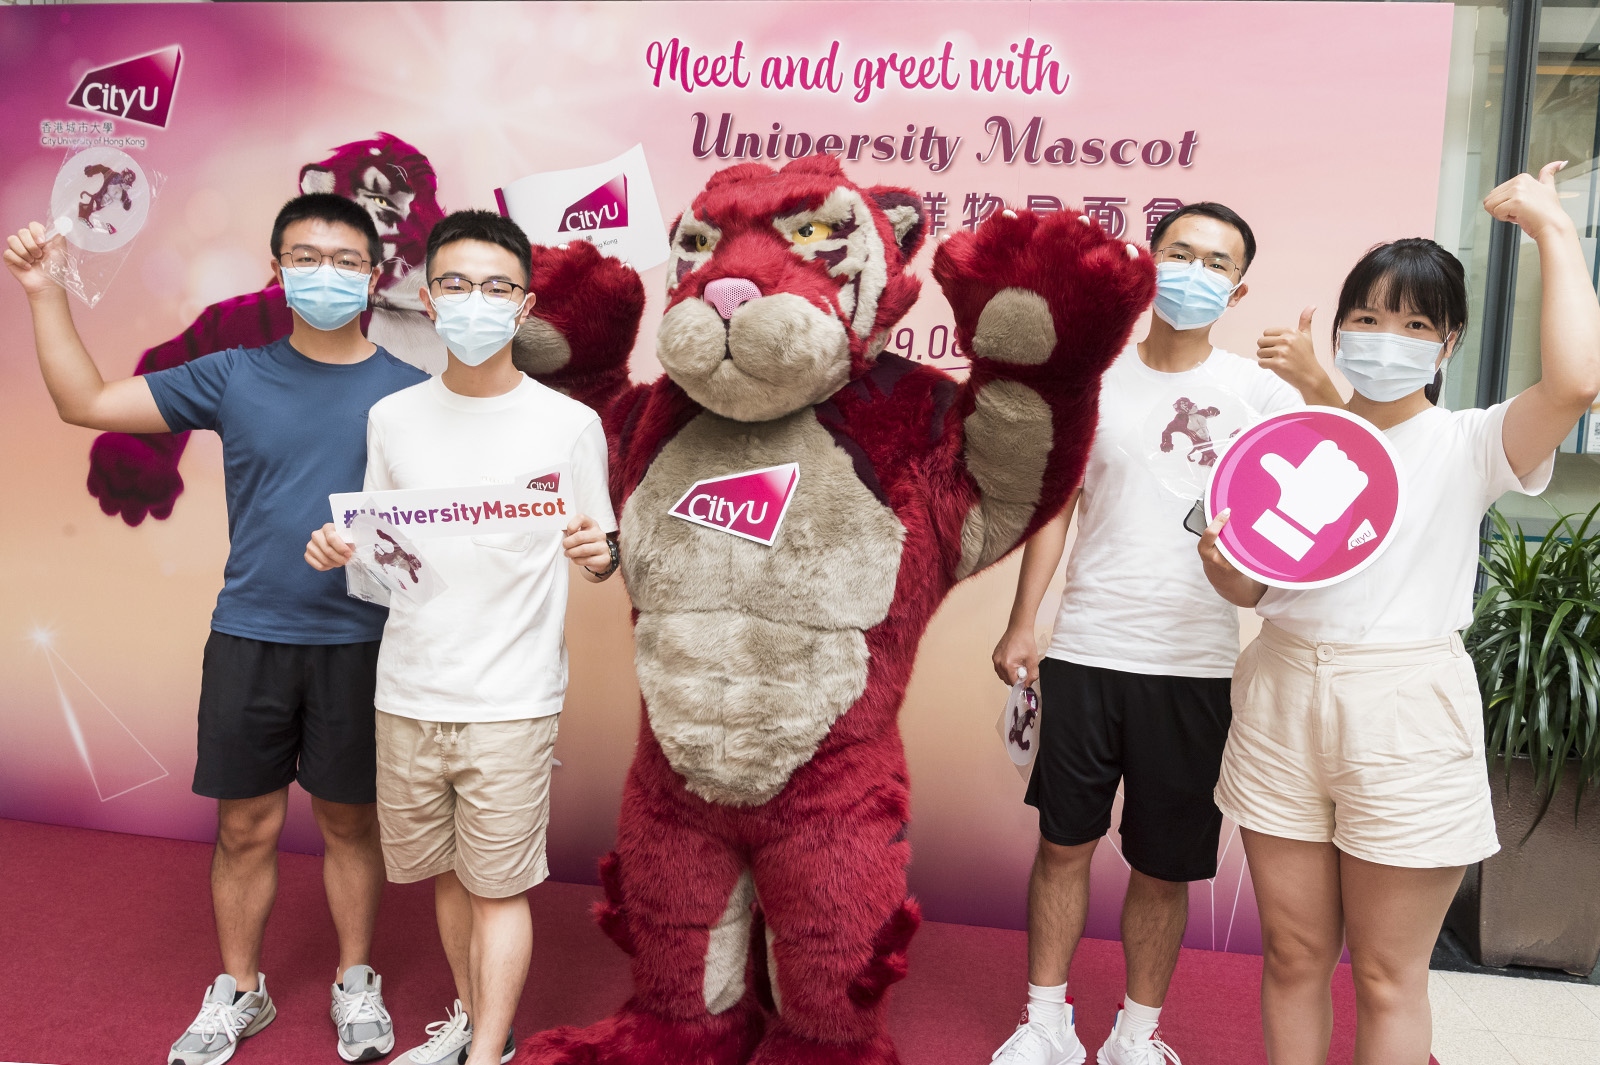 The University Mascot gives a warm welcome to students and staff at CityU.